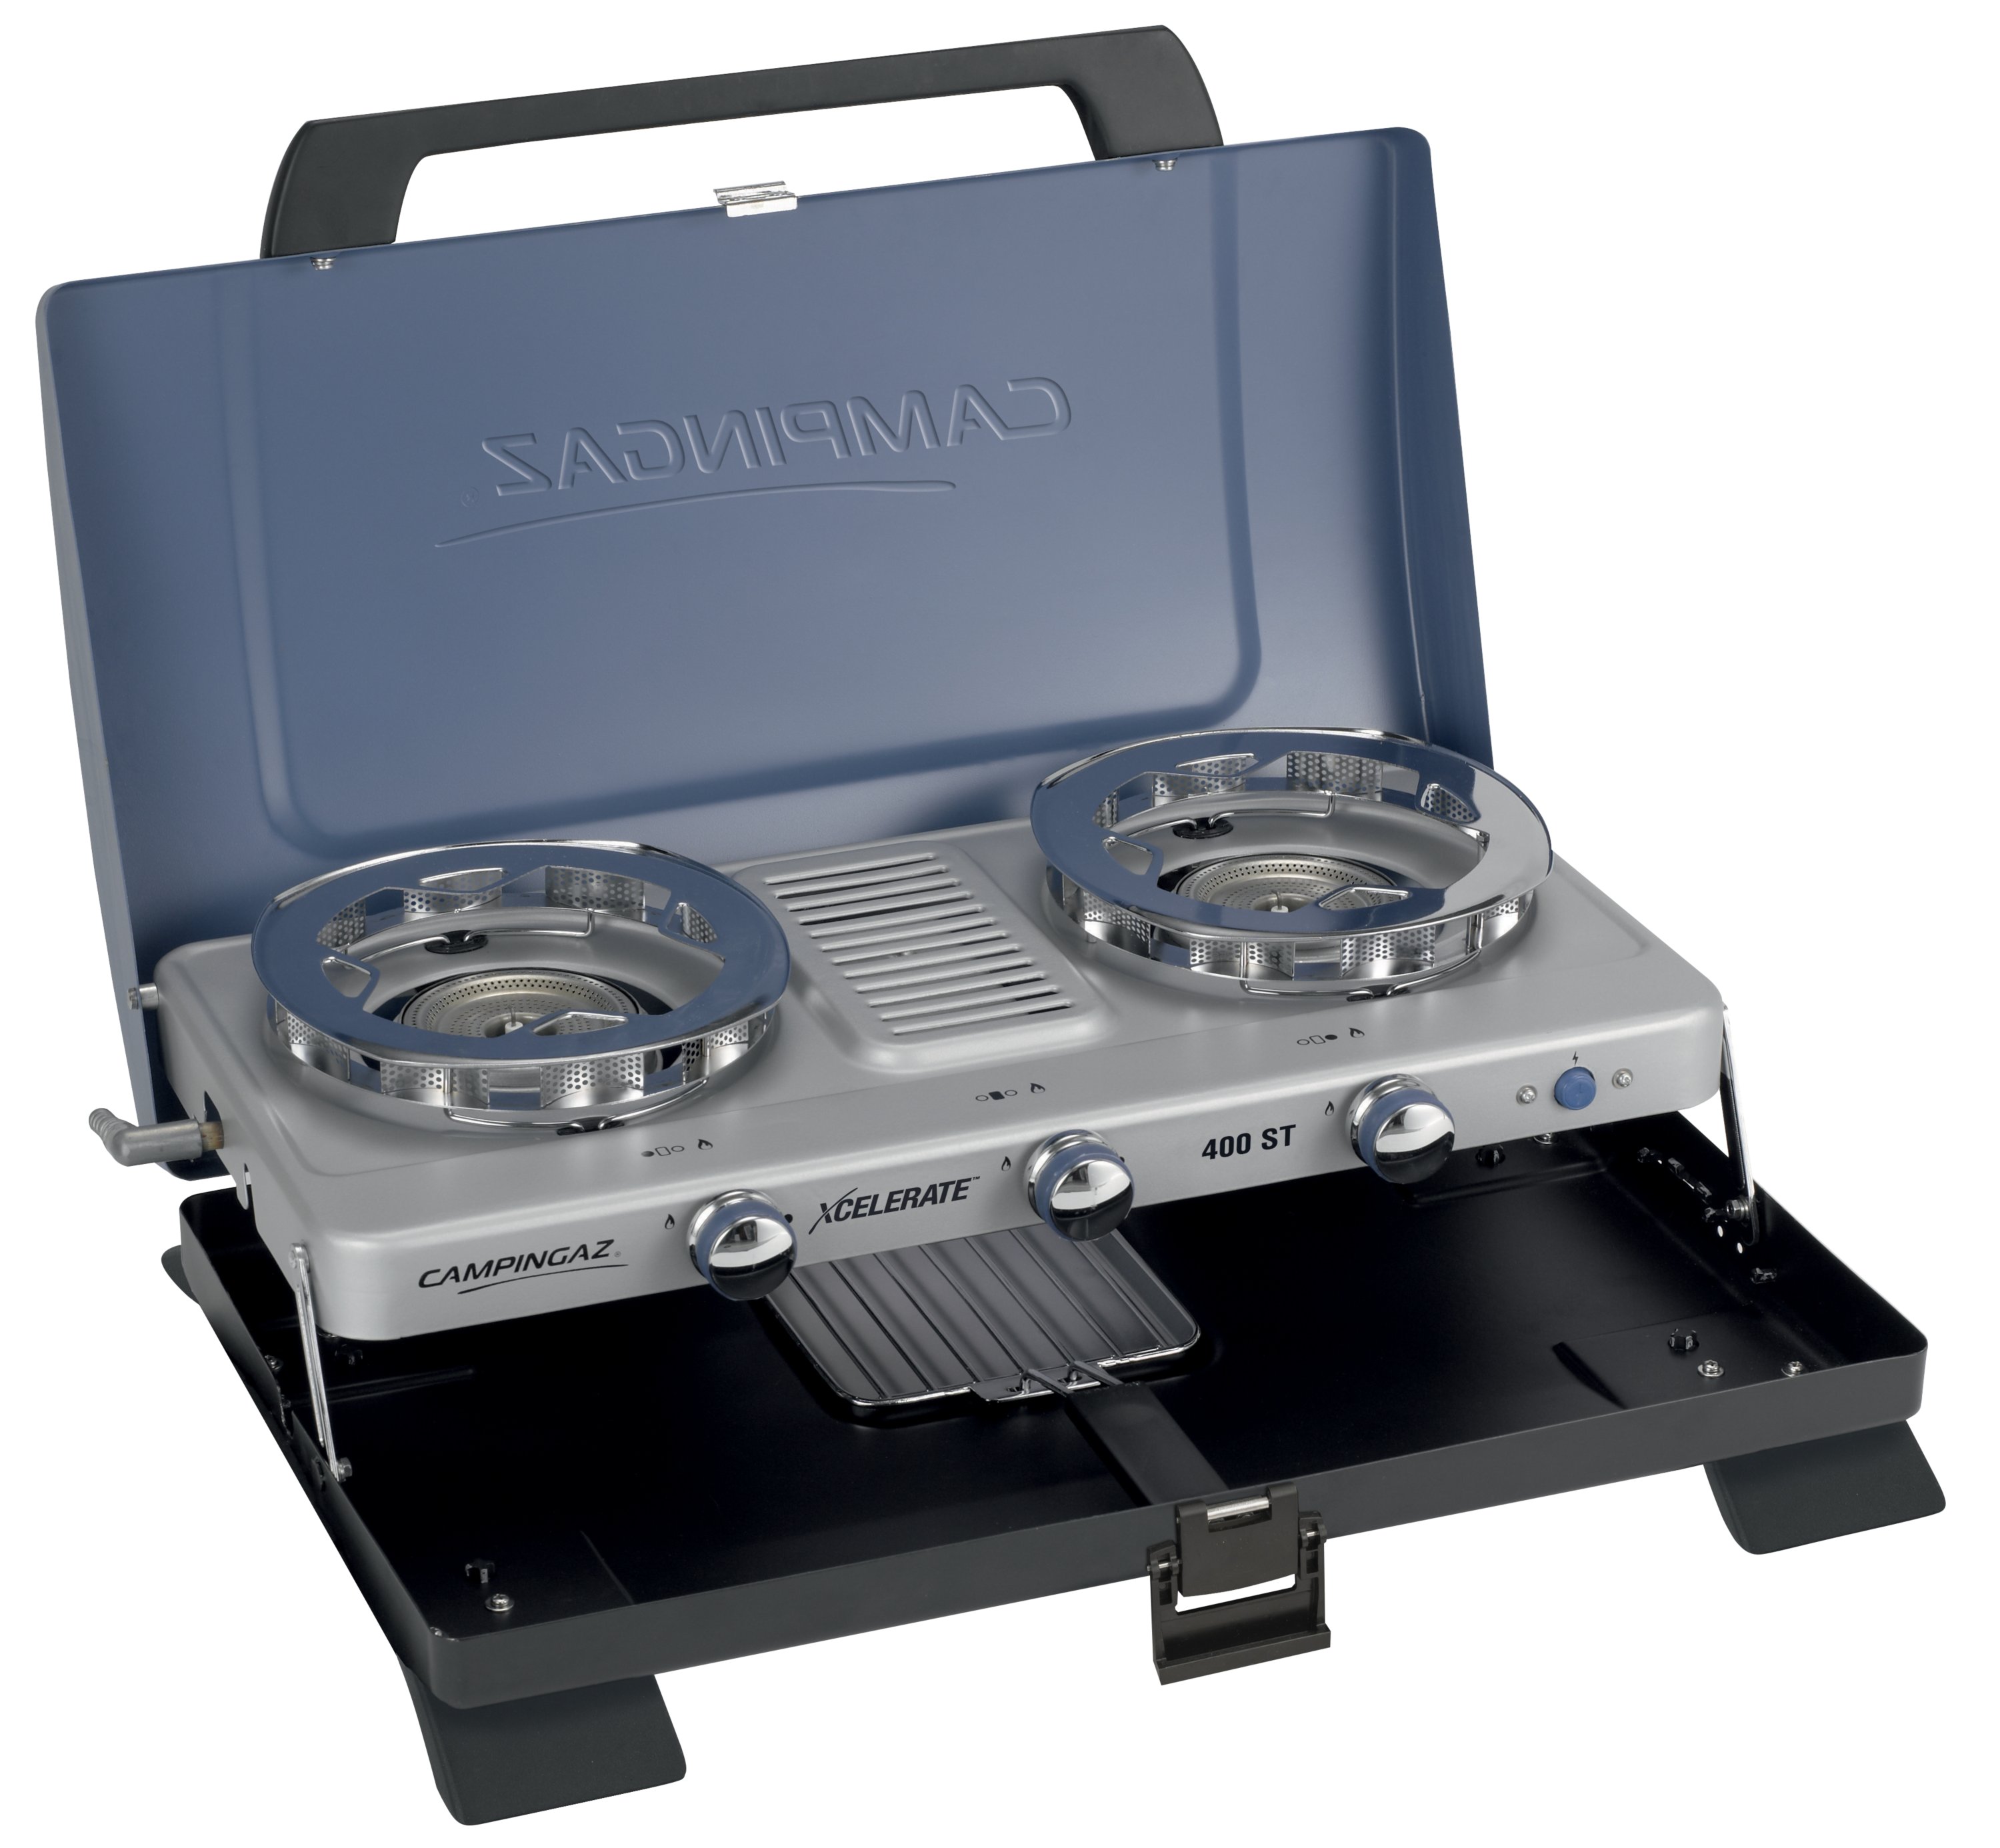 3138522101626 Campingaz Campingaz 400S Camping Stove Portable Two Burner Gas Cooker with Windshield 